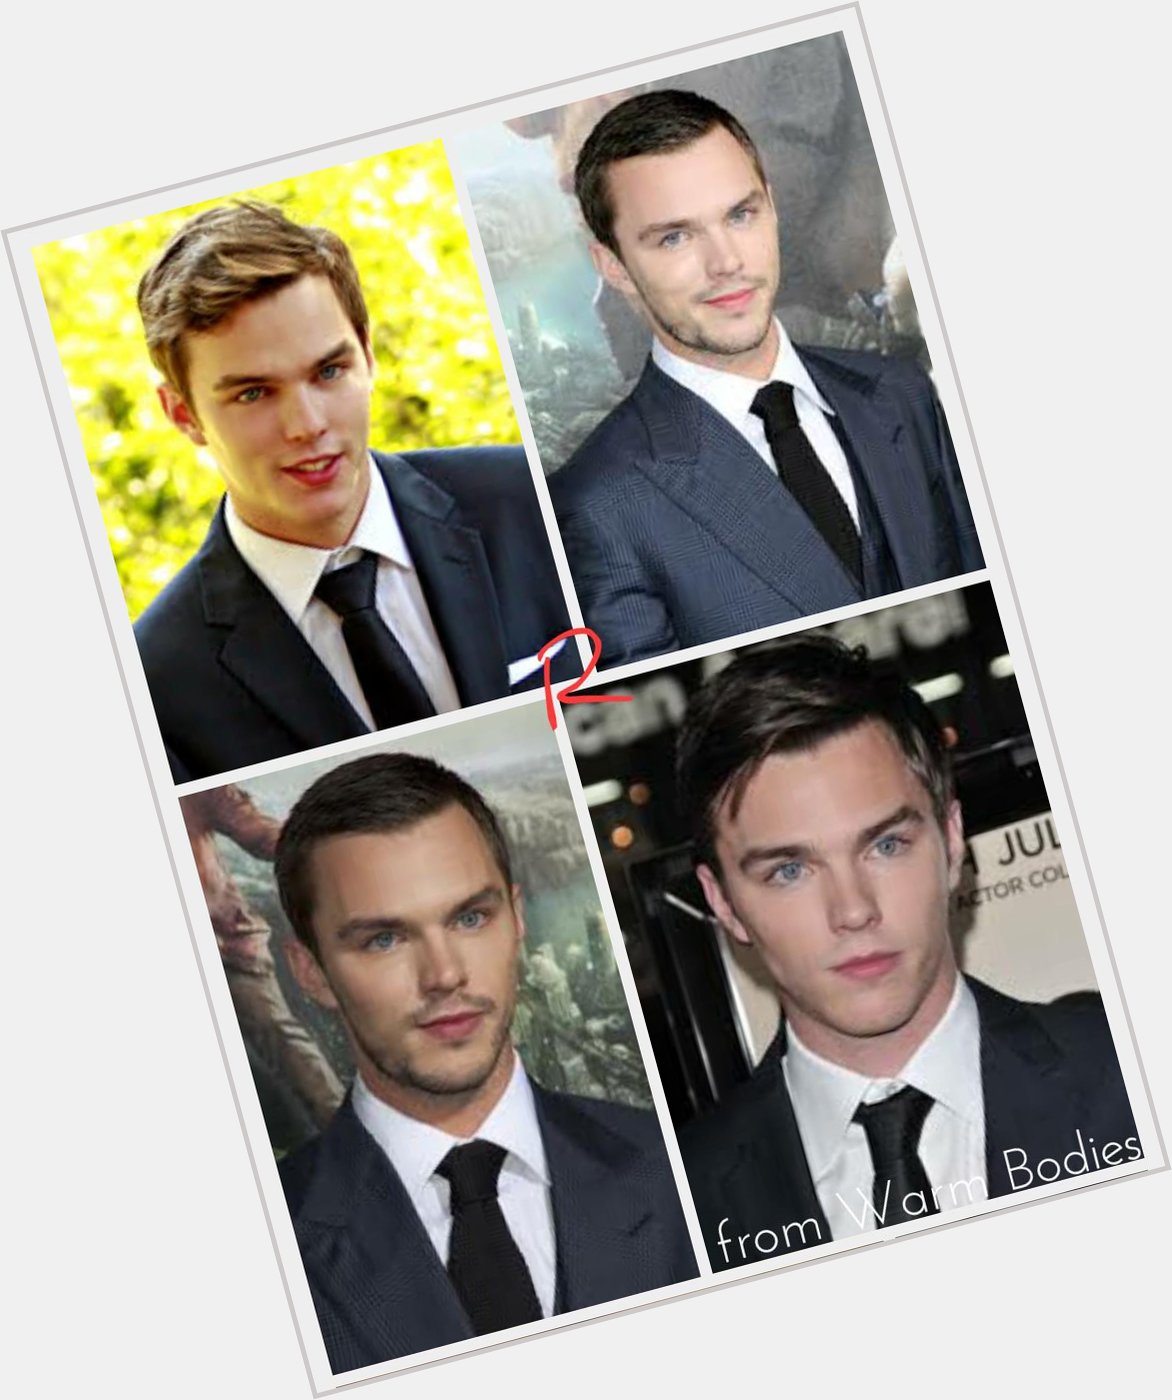 Happy birthday R! Nicholas Hoult from Tht movie oh-so-touched me.   (hisbdaywasactuallystrdy) 